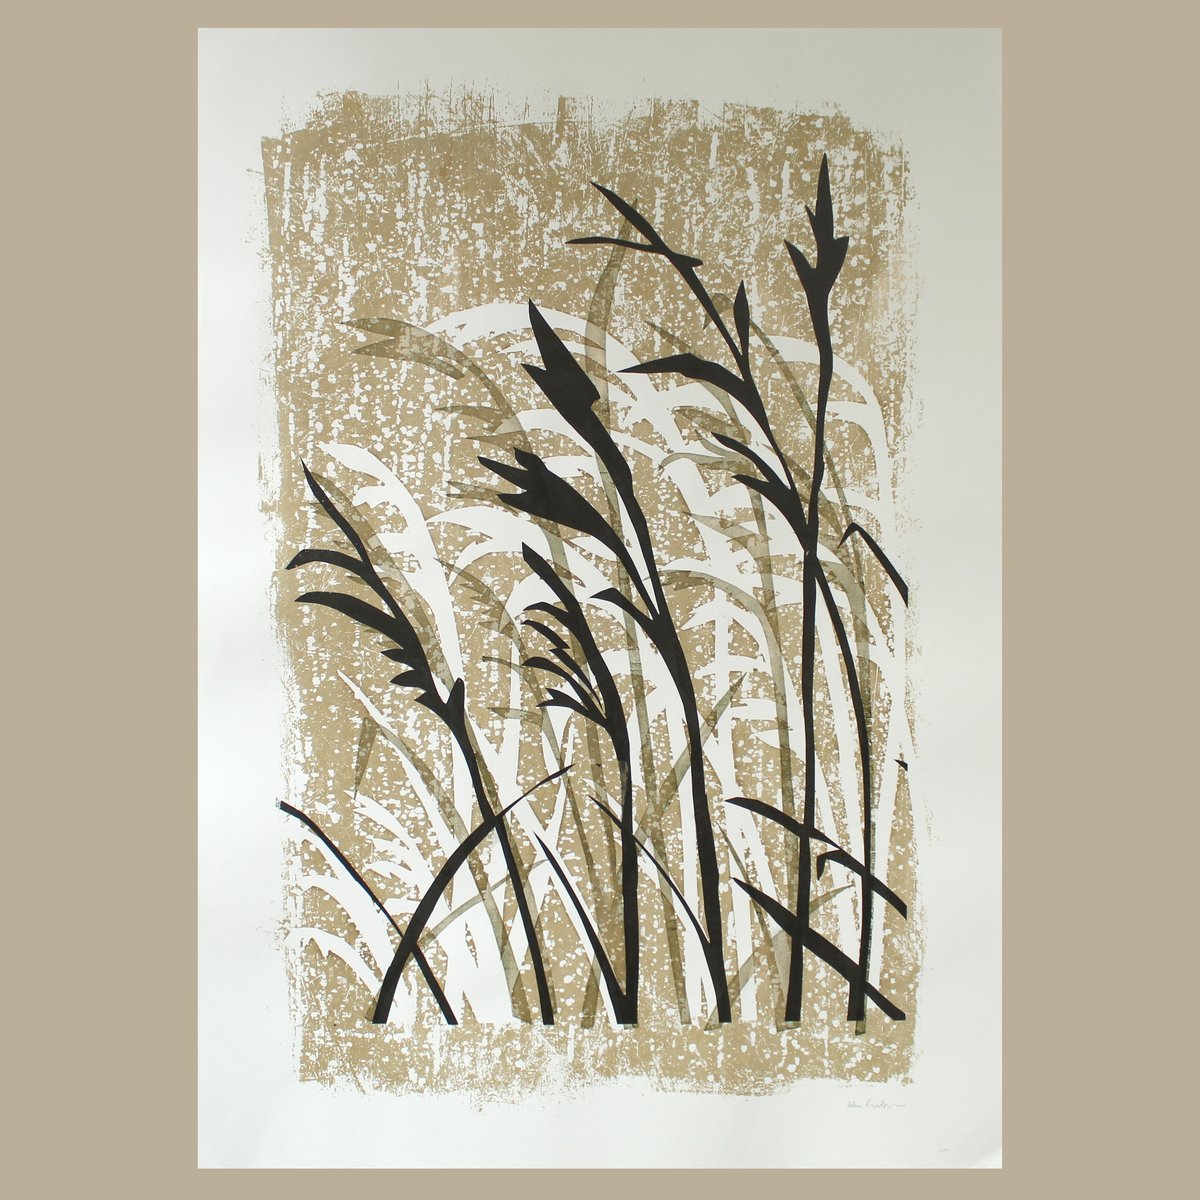 Image of Passing wheat field